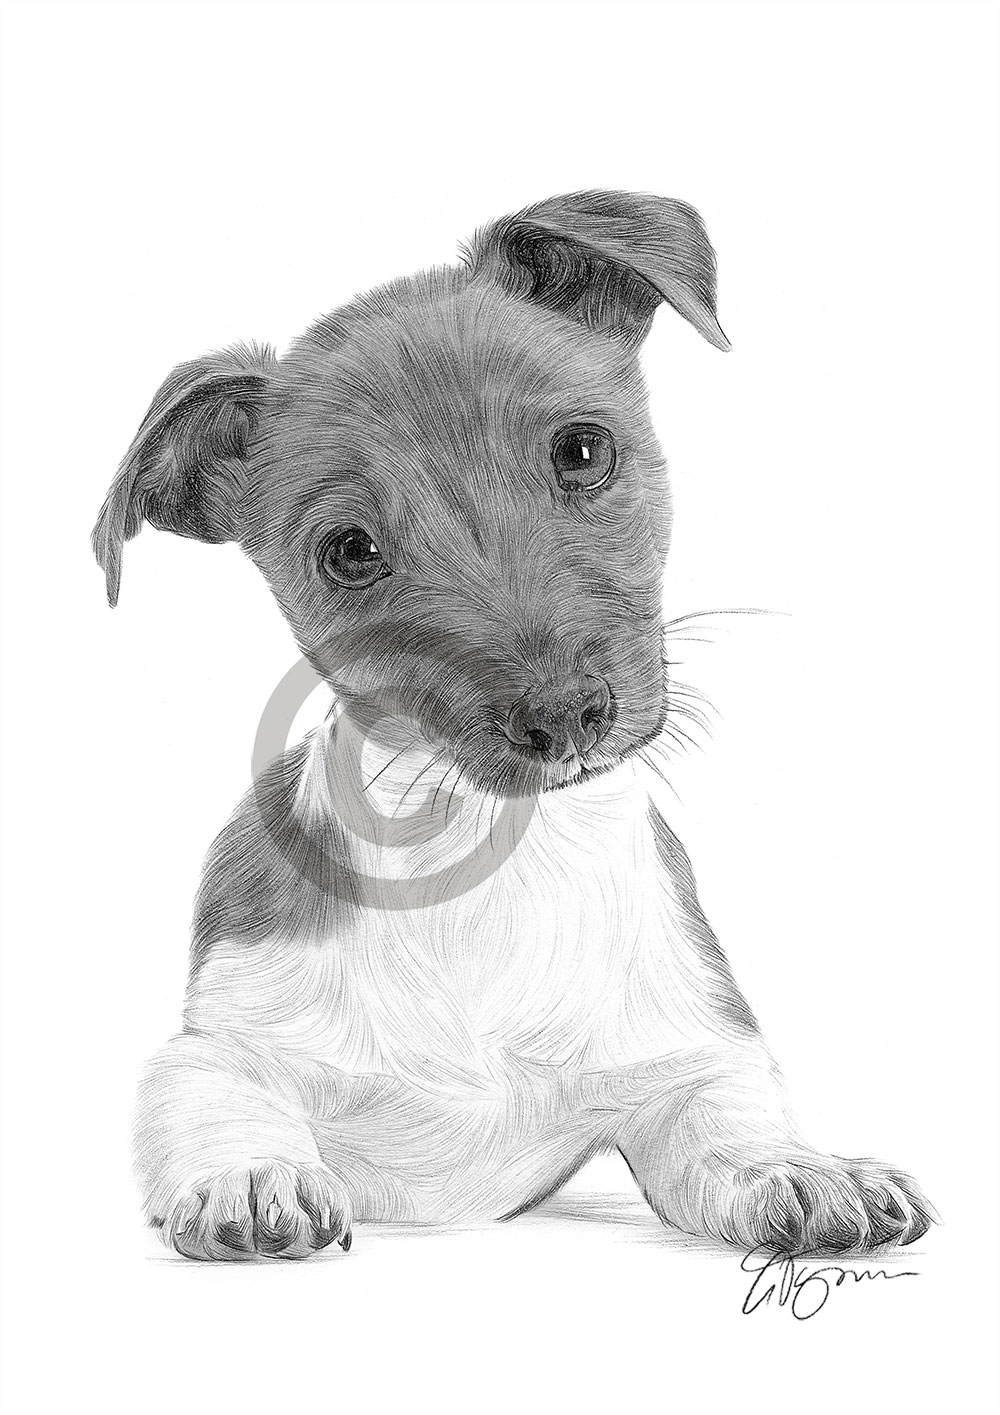 Pencil drawing of a Jack Russell Terrier puppy by artist Gary Tymon